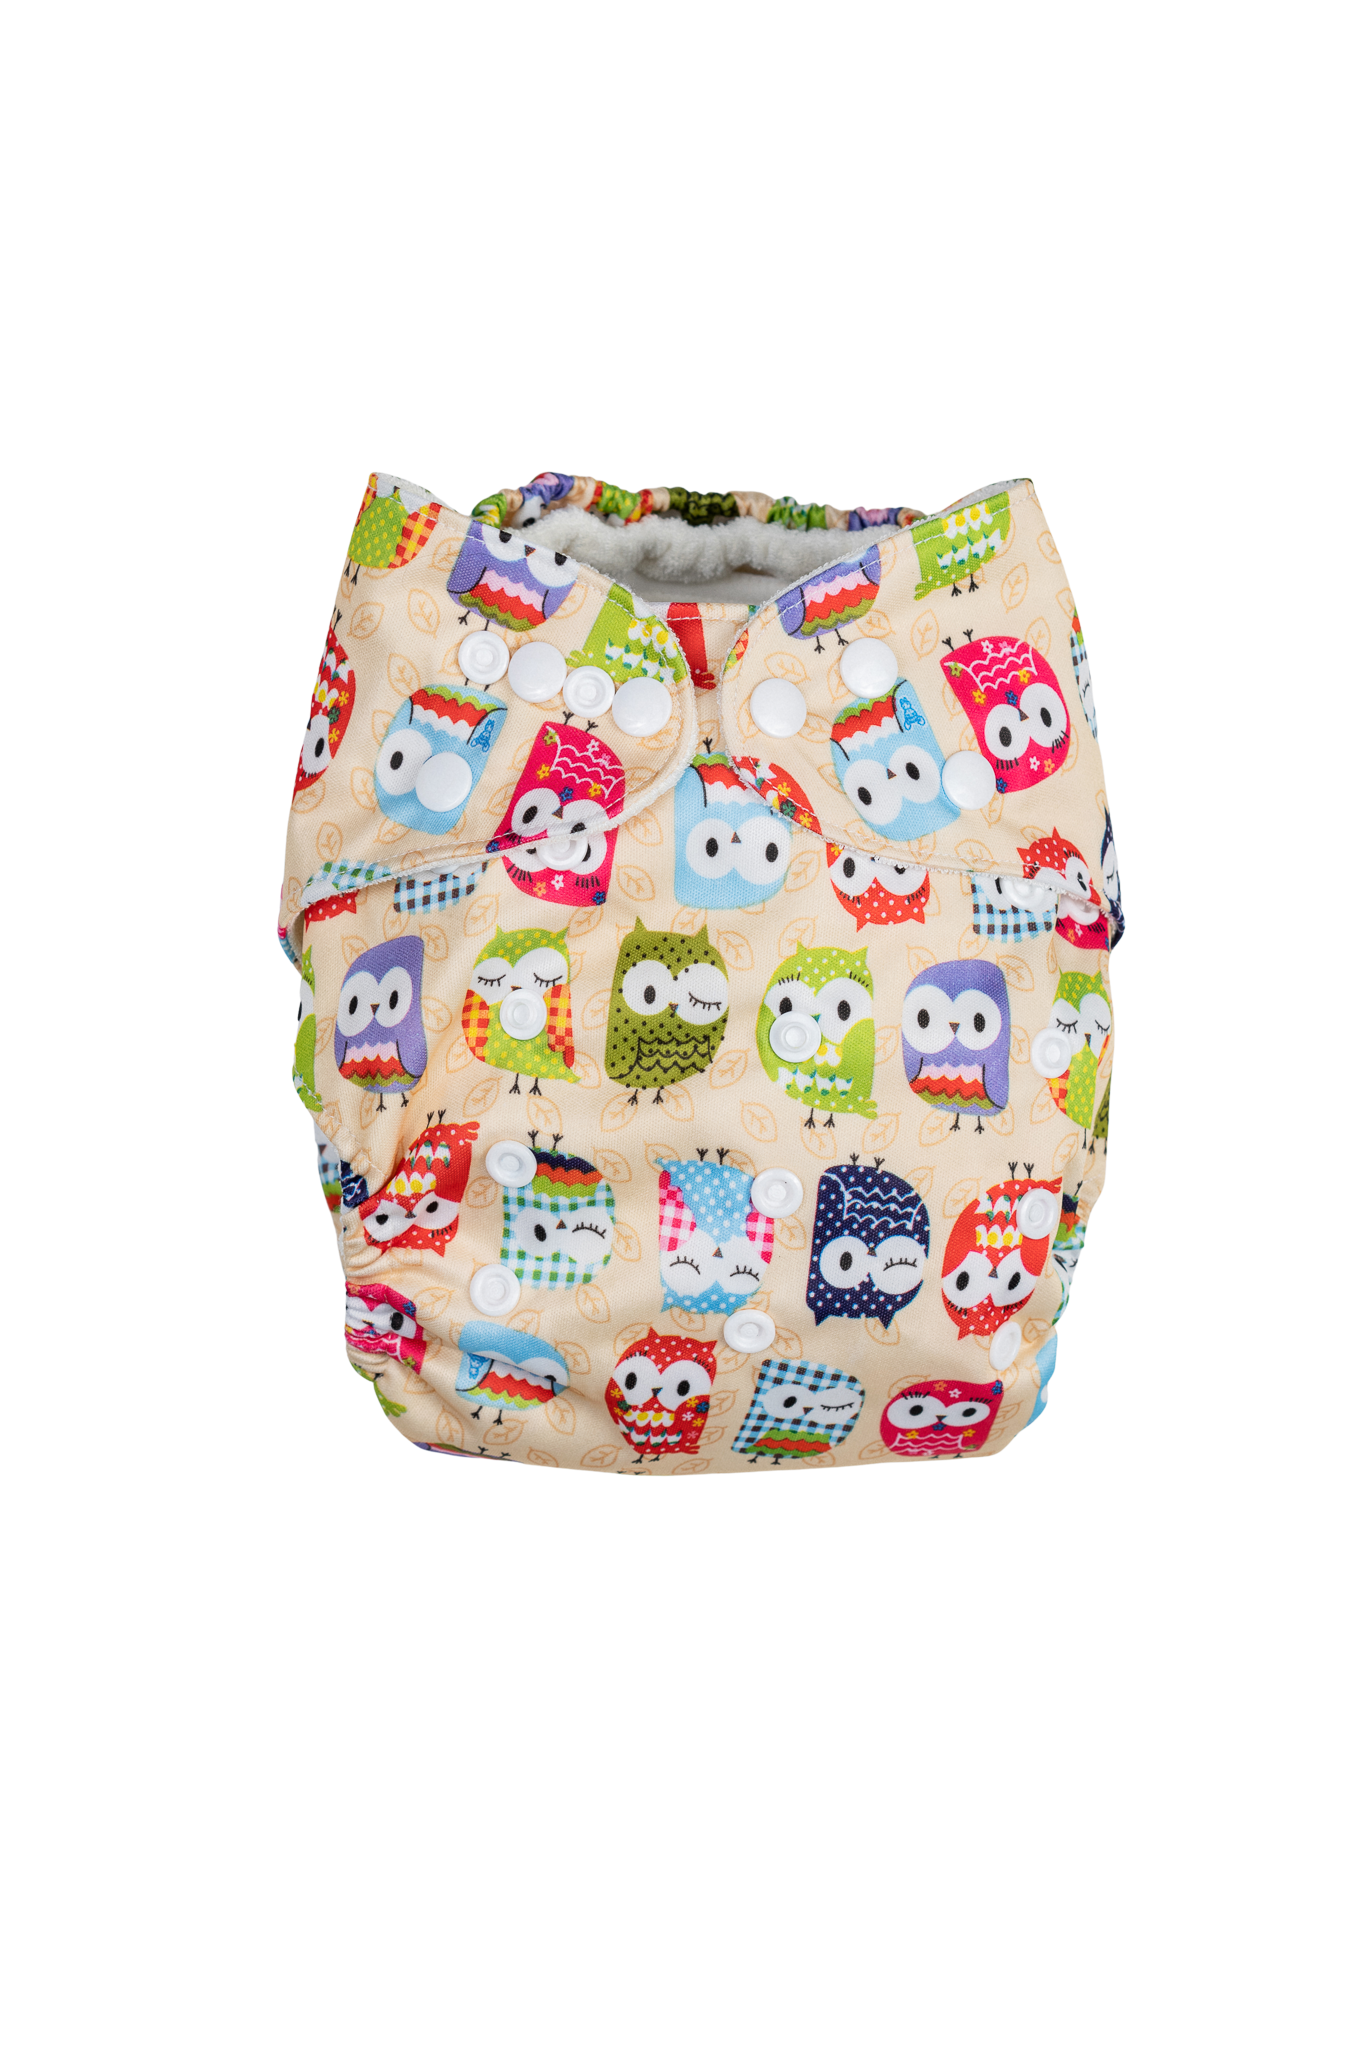 Bamboo Size-Adjustable Cloth Nappy - Playful Owls,Bamboo Size-Adjustable Cloth Nappy - Playful Owls